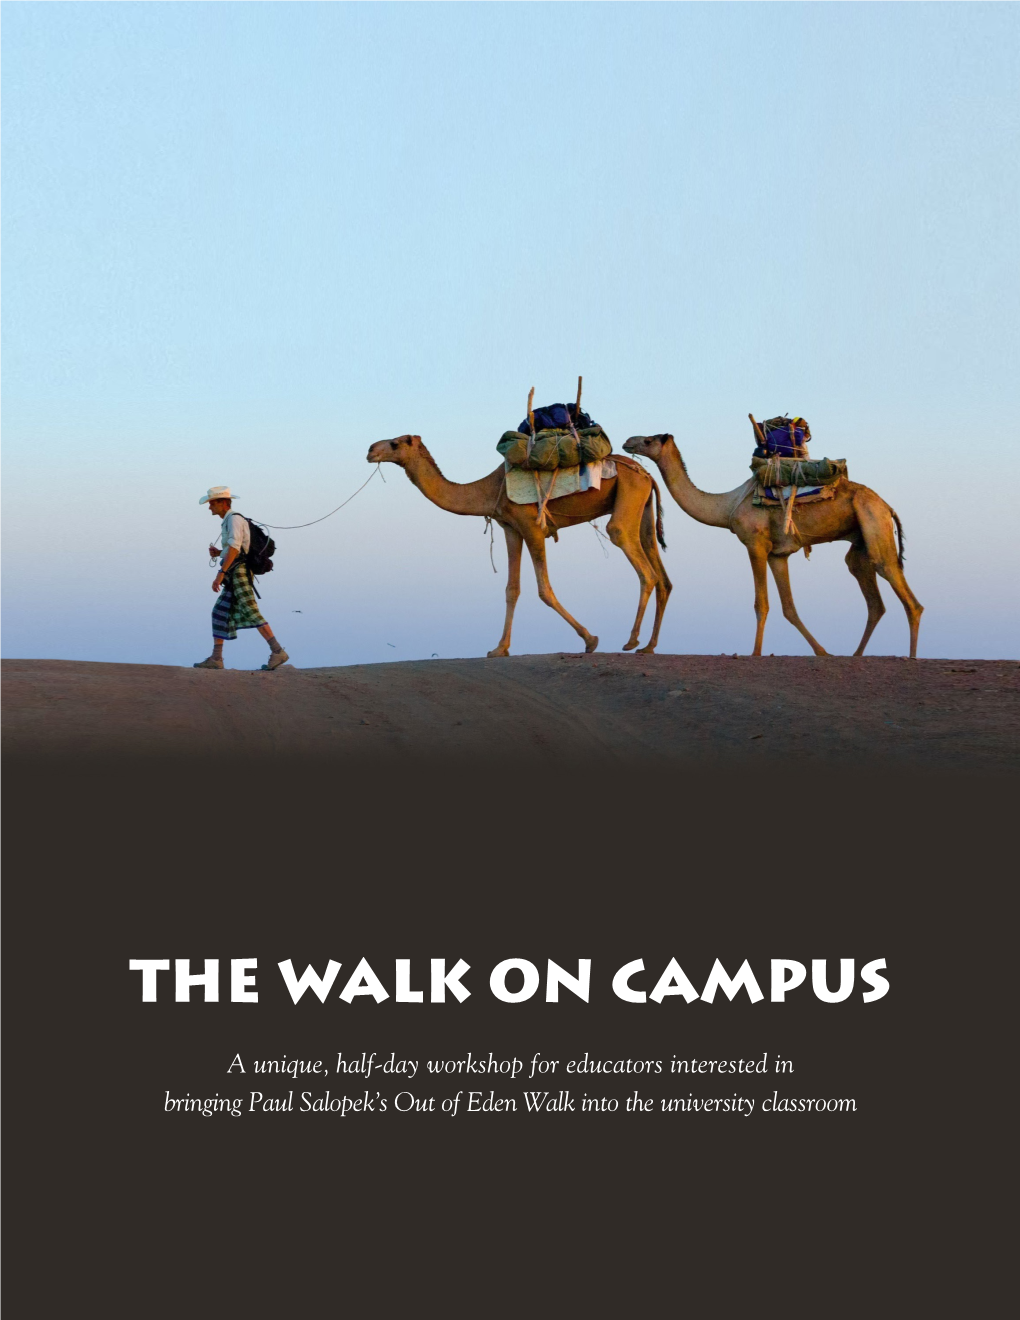 The Walk on Campus